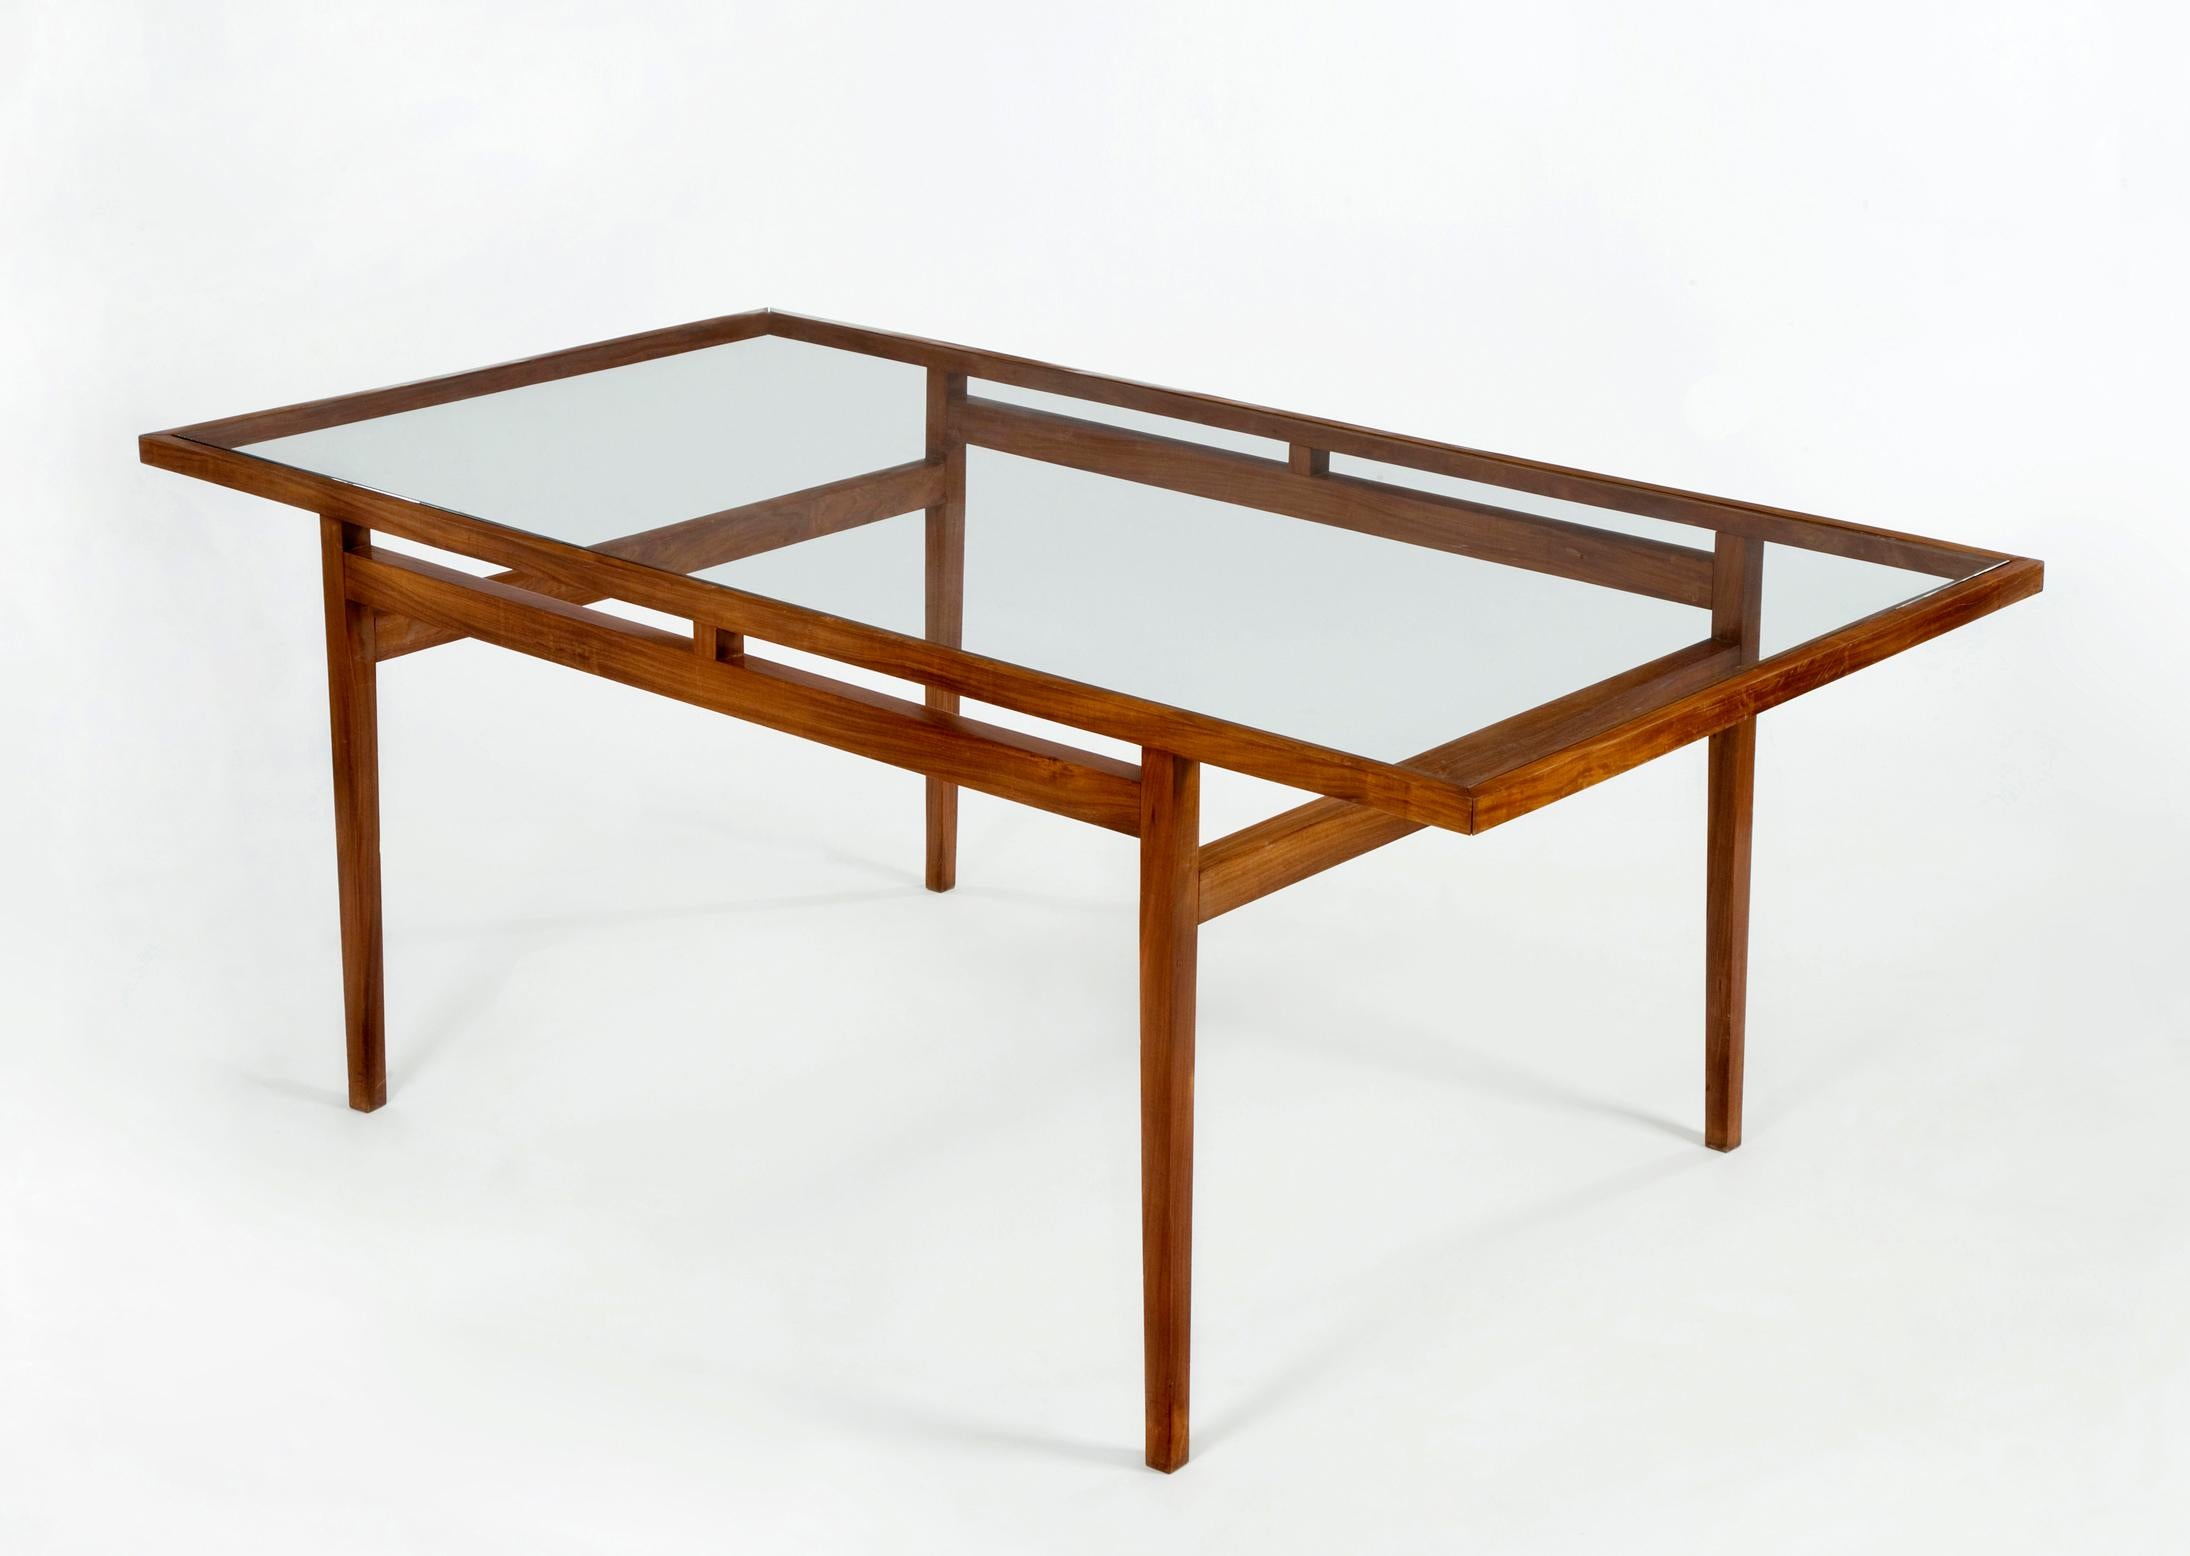 Dining table with frame in solid rosewood with glass top. Designed for Branco and Preto, Brazil, 1950s.